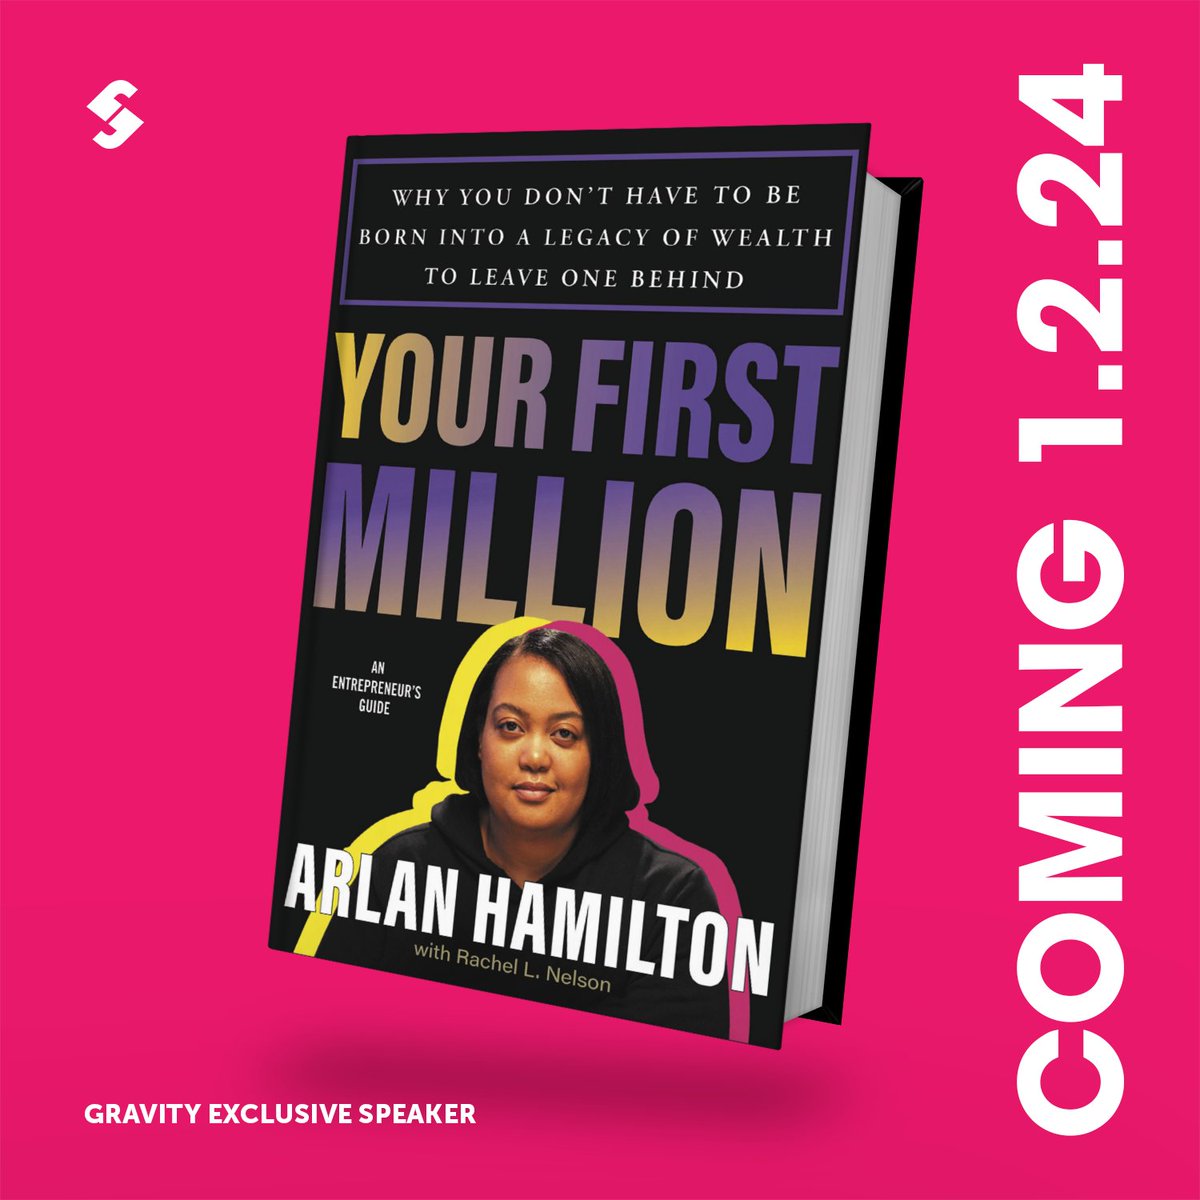 Arlan Hamilton's new book is available 1/2/24: 'Your First Million: Why You Don’t Have to Be Born into a Legacy of Wealth to Leave One Behind.' Savvy & first-hand perspective from 'one of the few Black women to break into the boy's club of Silicon Valley.' amzn.to/3NA3PKb